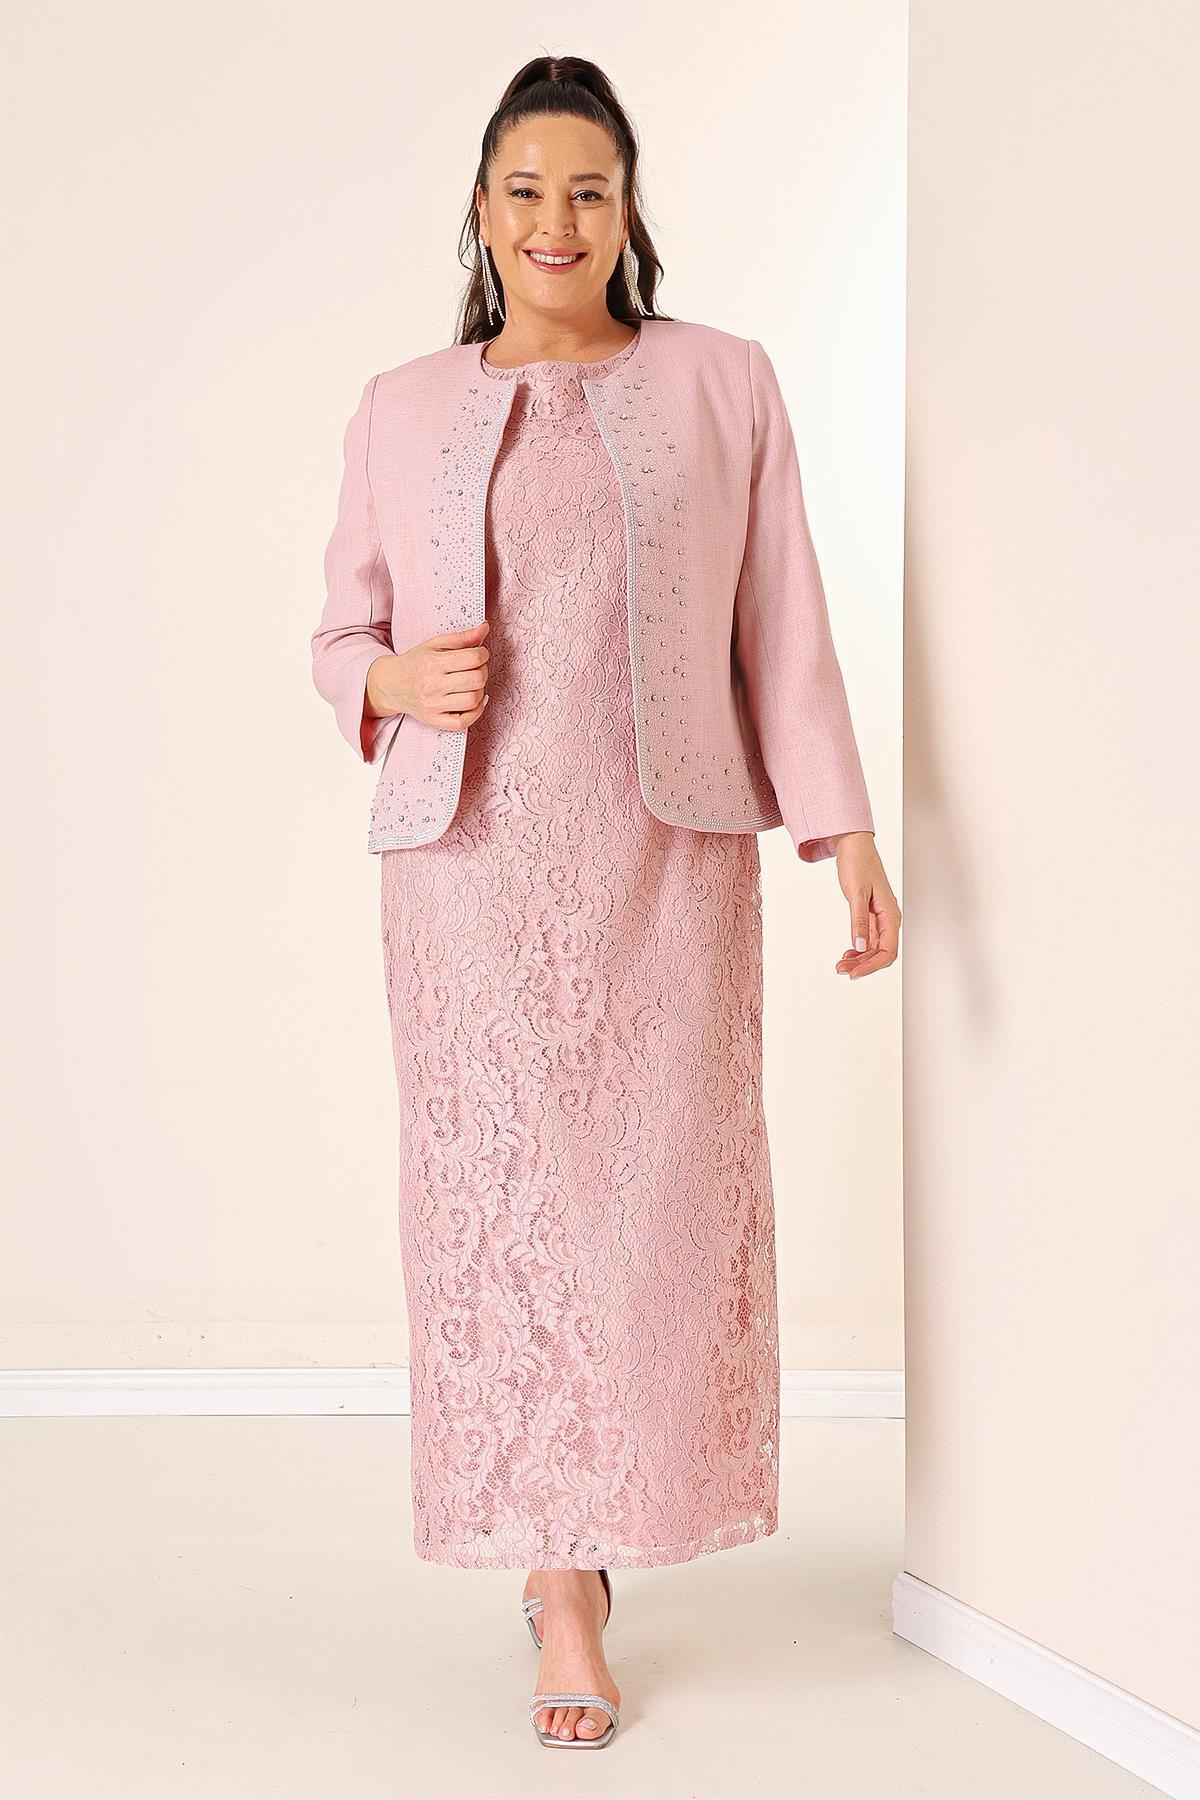 By Saygı Sleeveless Floral Lace Long Dress Stone Detailed Crepe Jacket Lined Plus Size 2-Piece Suit